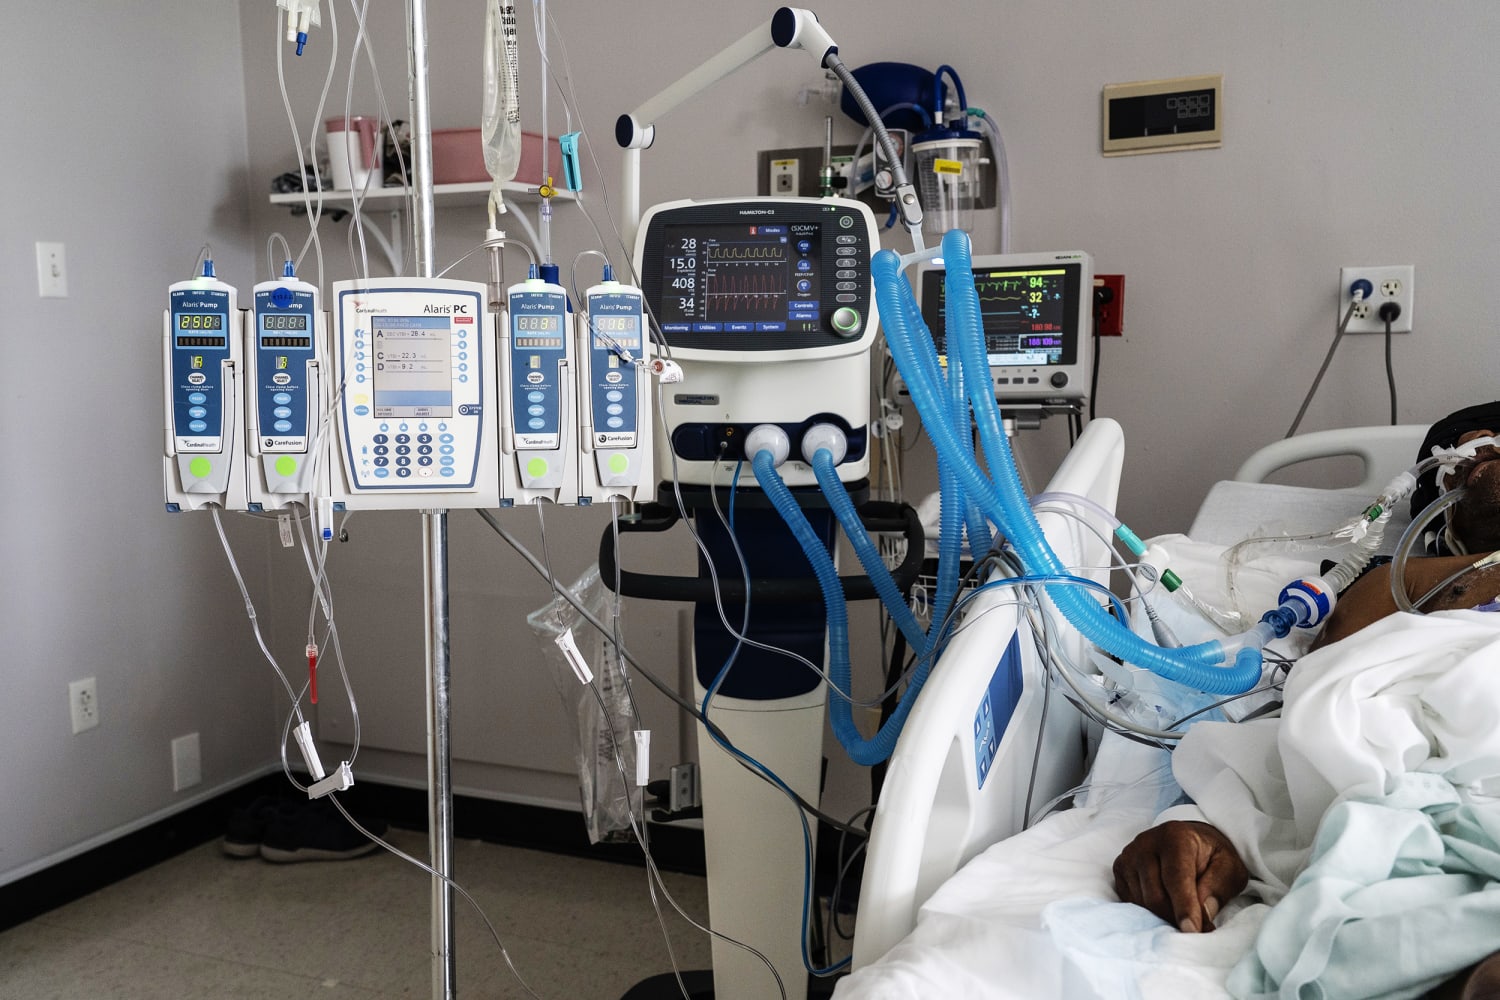 House Democrats find administration for ventilators by as as million